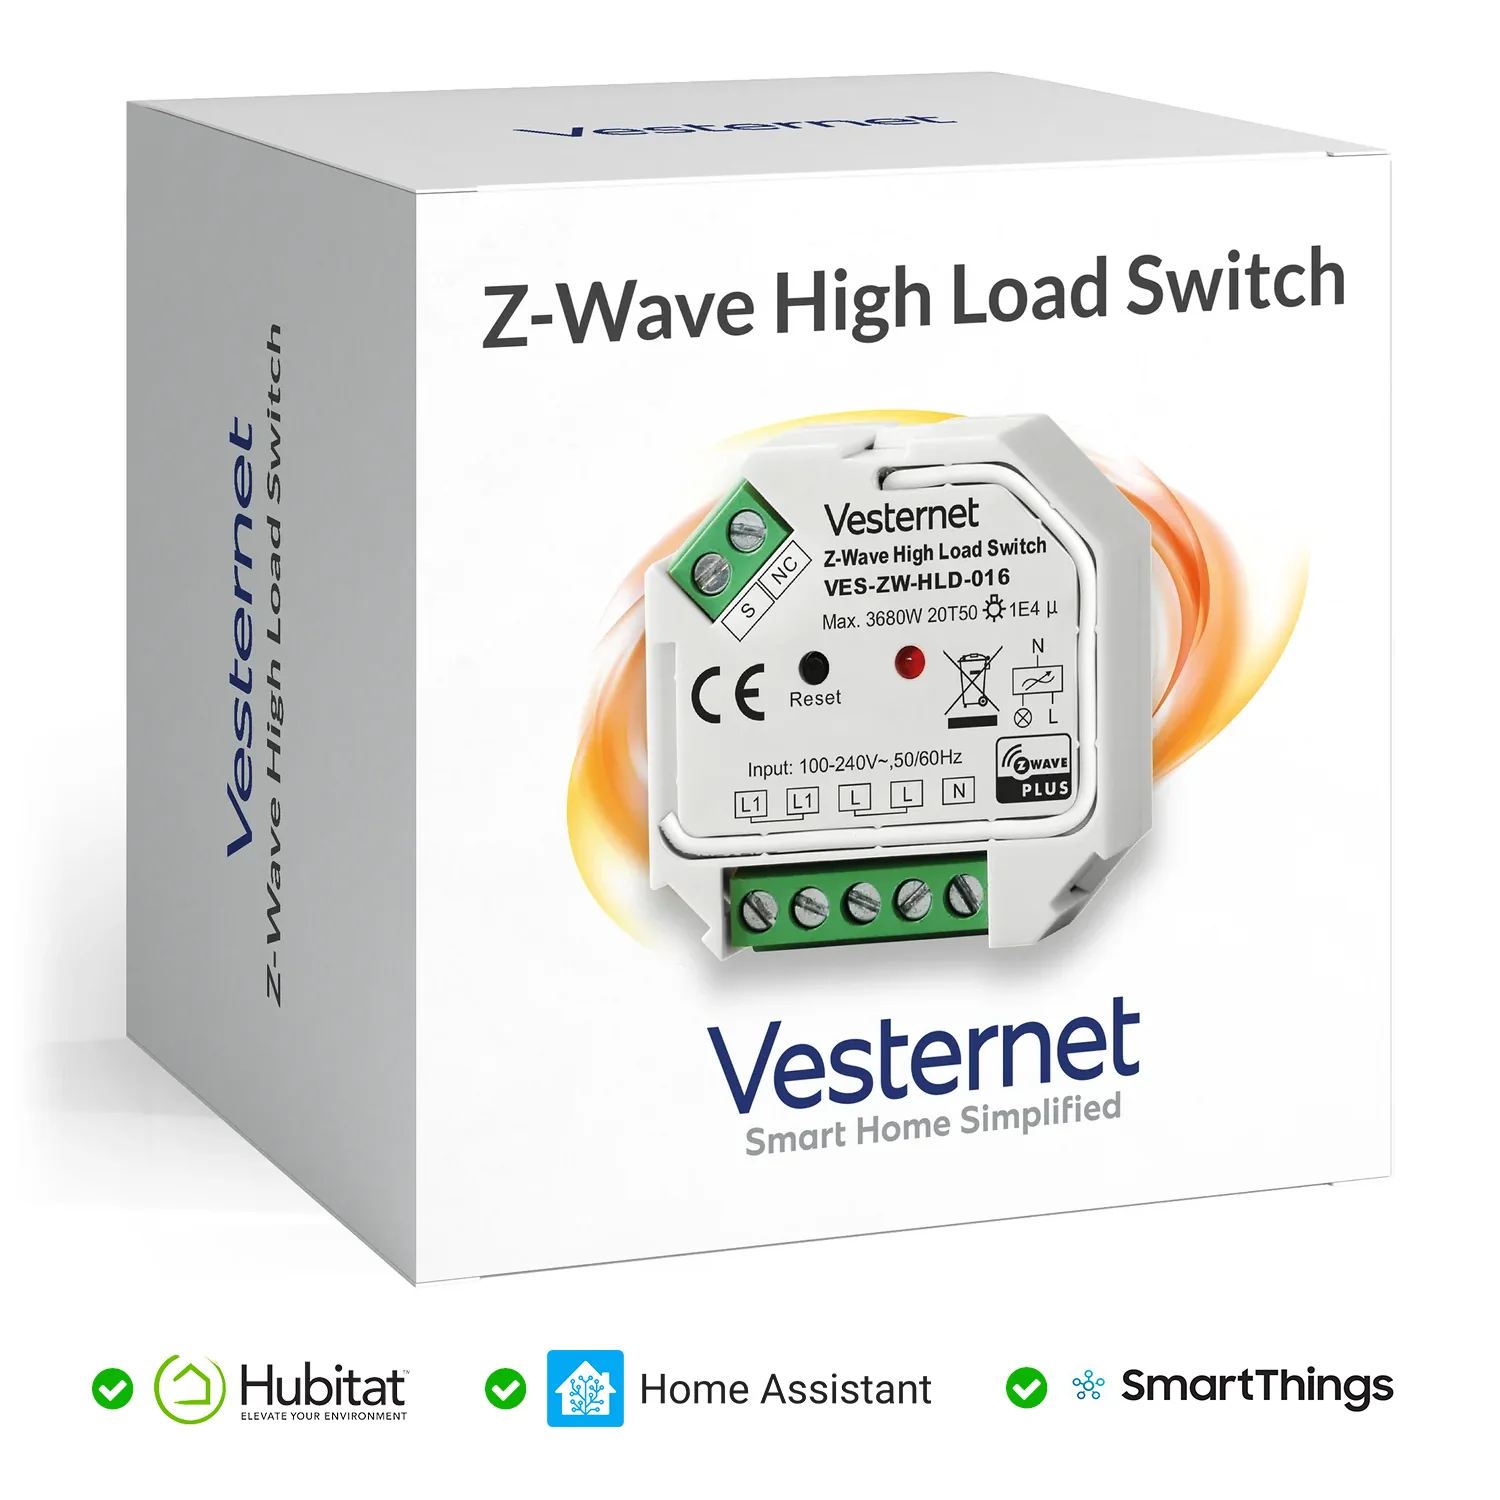 Vesternet Z-Wave High Load Switch Questions & Answers